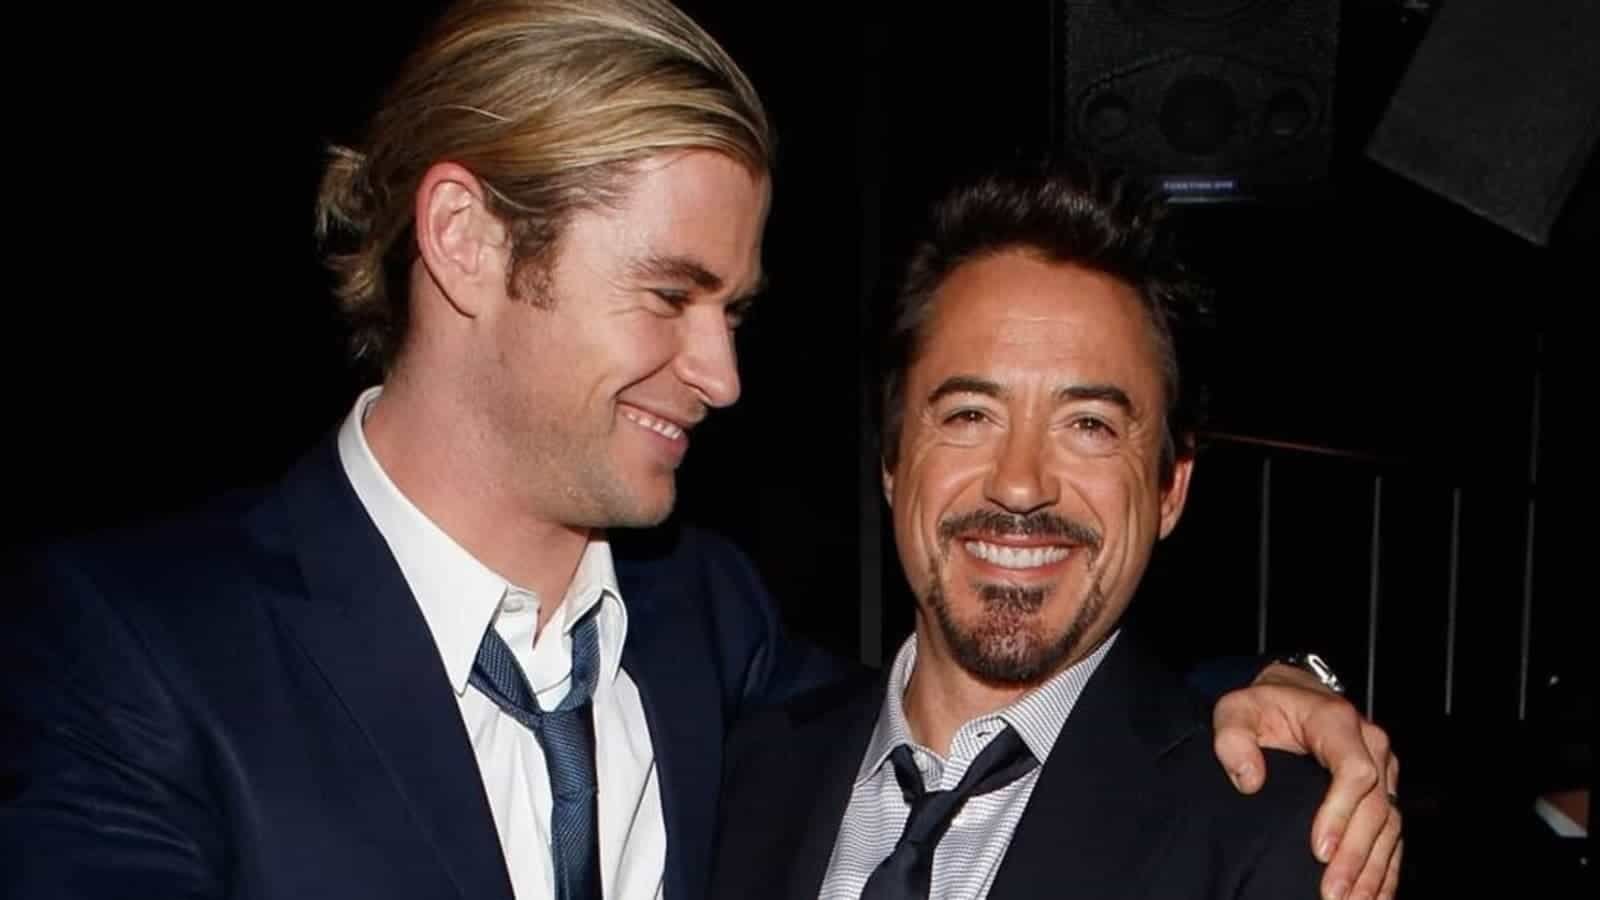 Robert Downey Jr Was Envious Towards Chirs Hemsworth, Stated 'F*** this guy', States Jeremy Renner